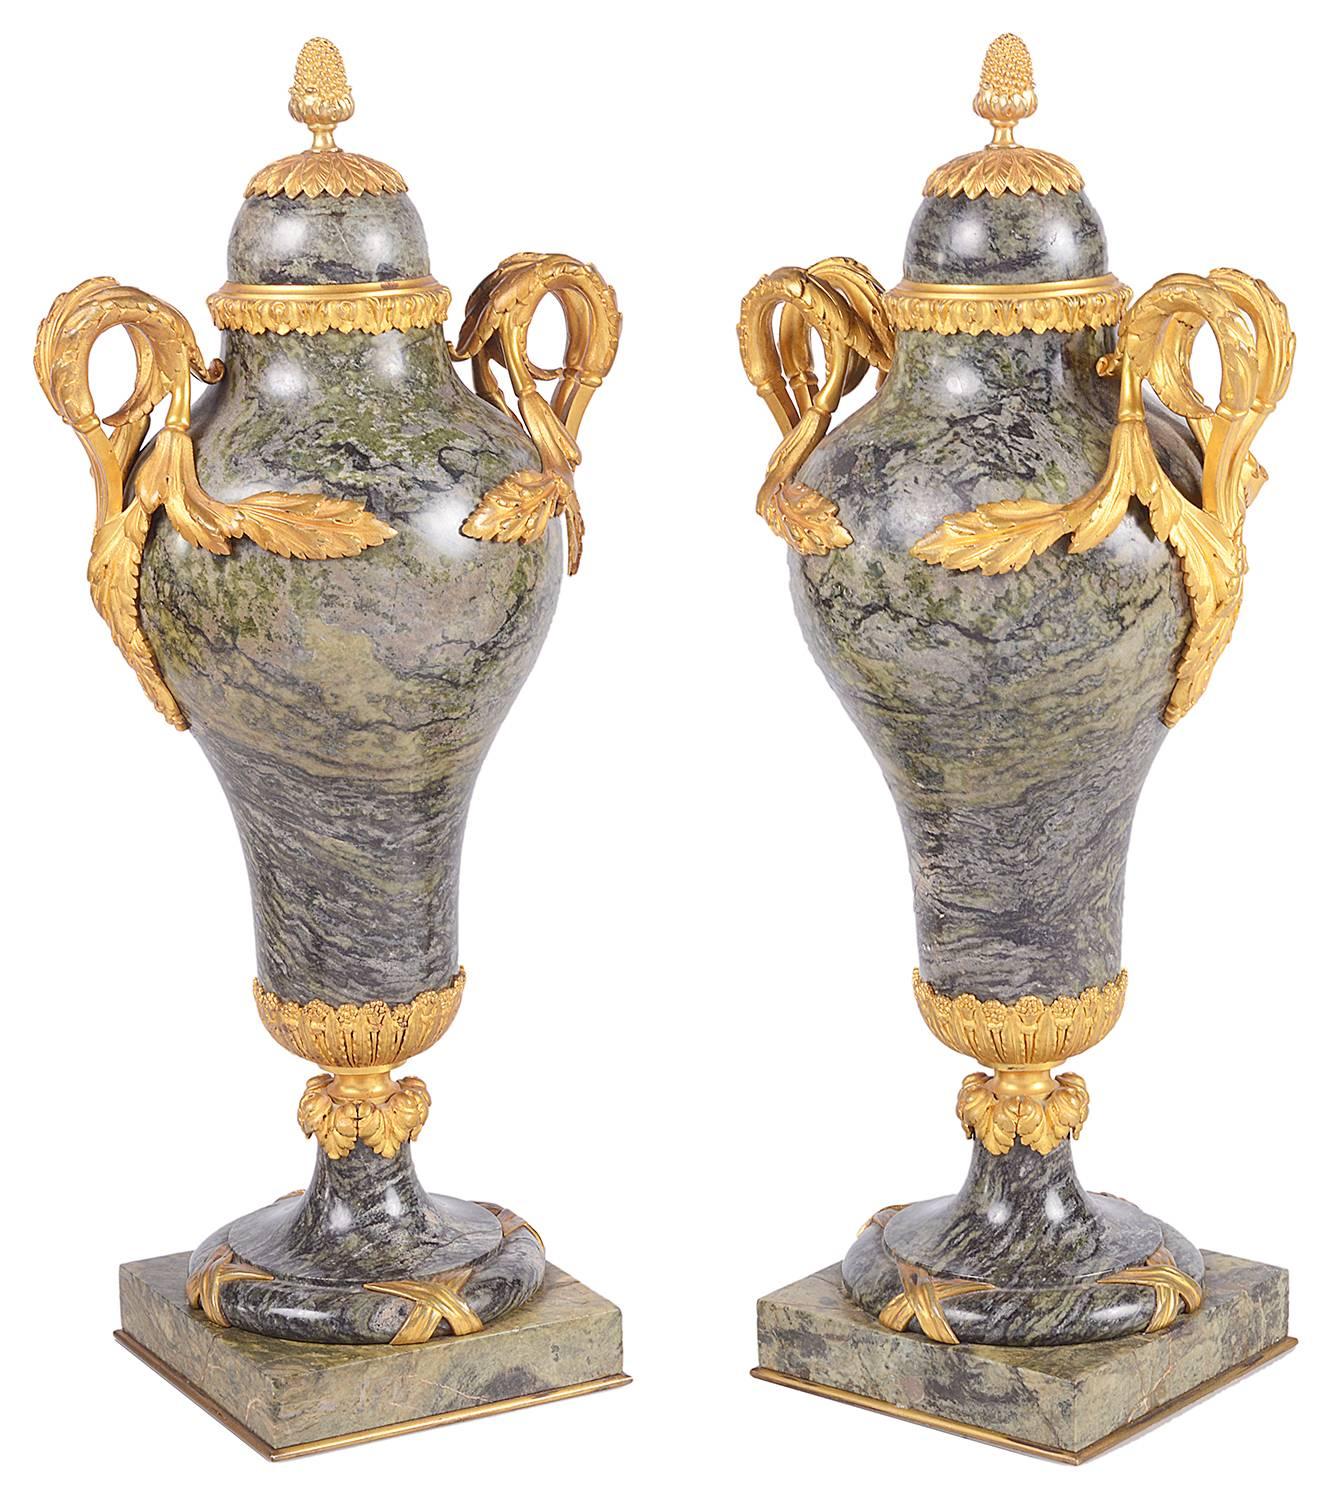 A good quality pair of French Marble and gilded ormolu lidded urns, circa 1880.